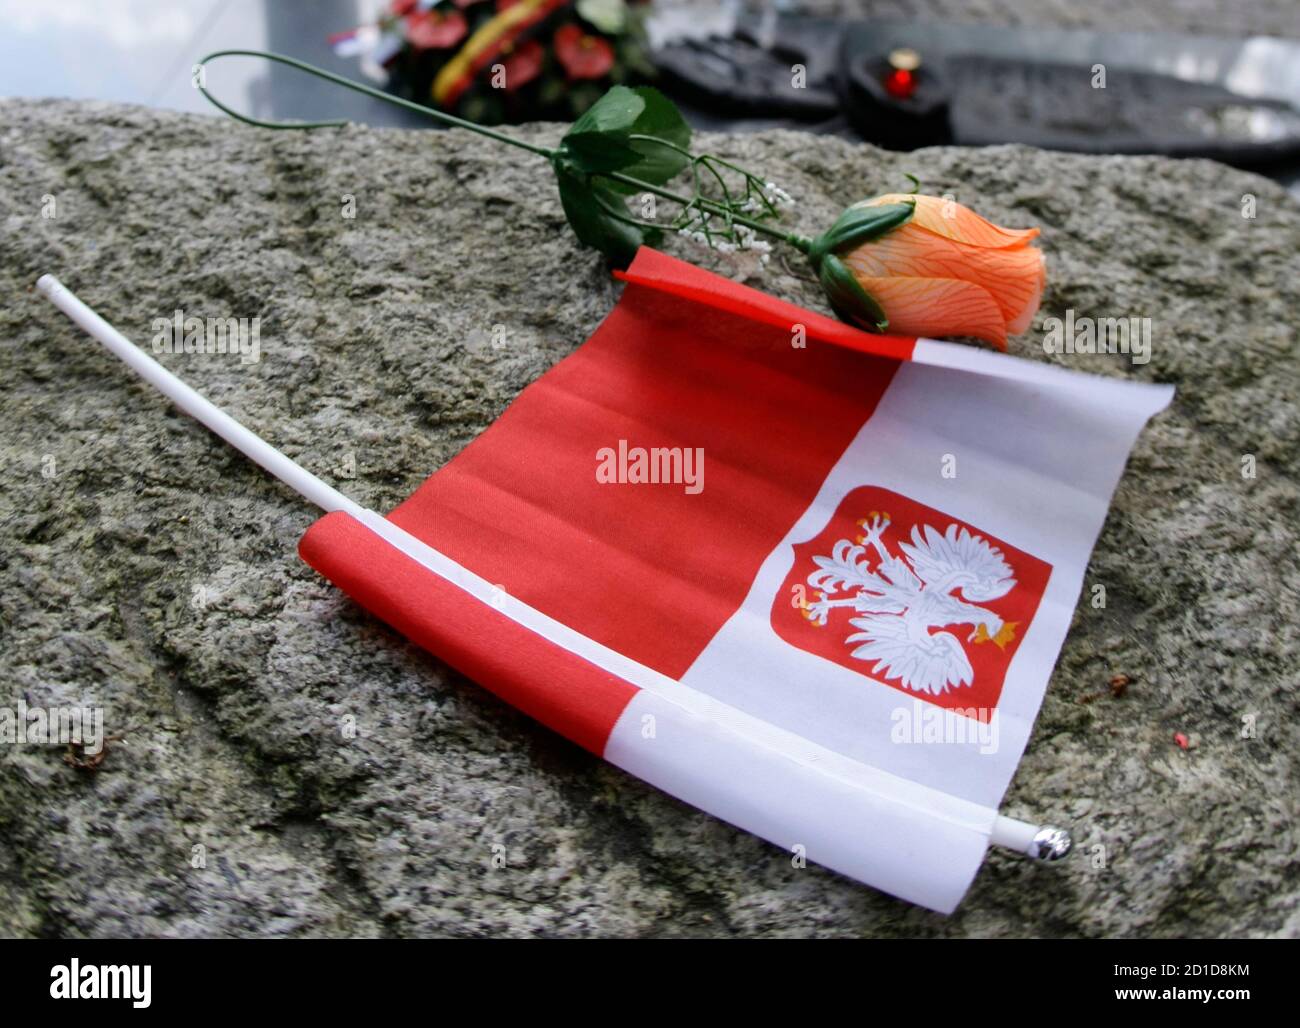 A rose and a Polish flag is placed on the grave of Major Henryk Sucharski who defended Poland during the first days of the World War II at Westerplatte, outside of Gdansk August 31, 2009. European leaders will commemorate on Tuesday the 70th anniversary of the outbreak of World War Two at ceremonies in Poland already clouded by disputes over historic responsibility that pit Russia against the West. Russian Prime Minister Vladimir Putin's speech in the Polish Baltic port of Gdansk will be keenly scrutinised by Poles, Balts and others irked by what they see as Moscow's attempts to whitewash Sovi Stock Photo